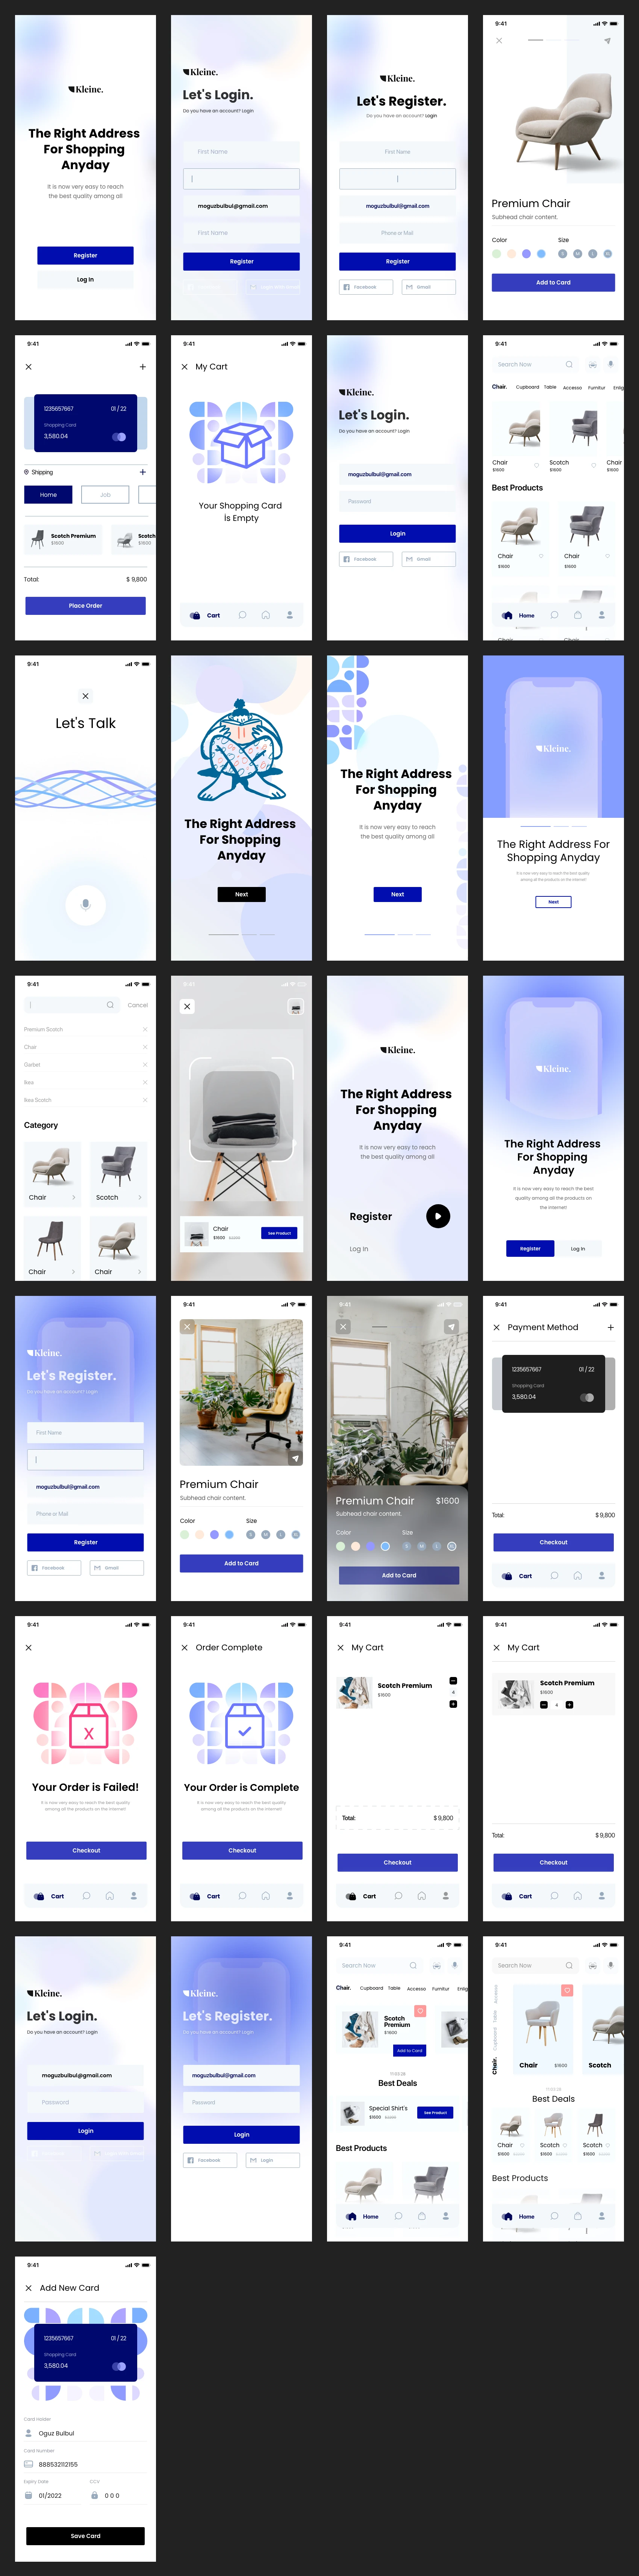 Kleine Free eCommerce UI Kit for Adobe XD - Kleine is free mobile UI Kit designed exclusively for Adobe XD. It features 30+ mobile screen pages to get you started on your projects.